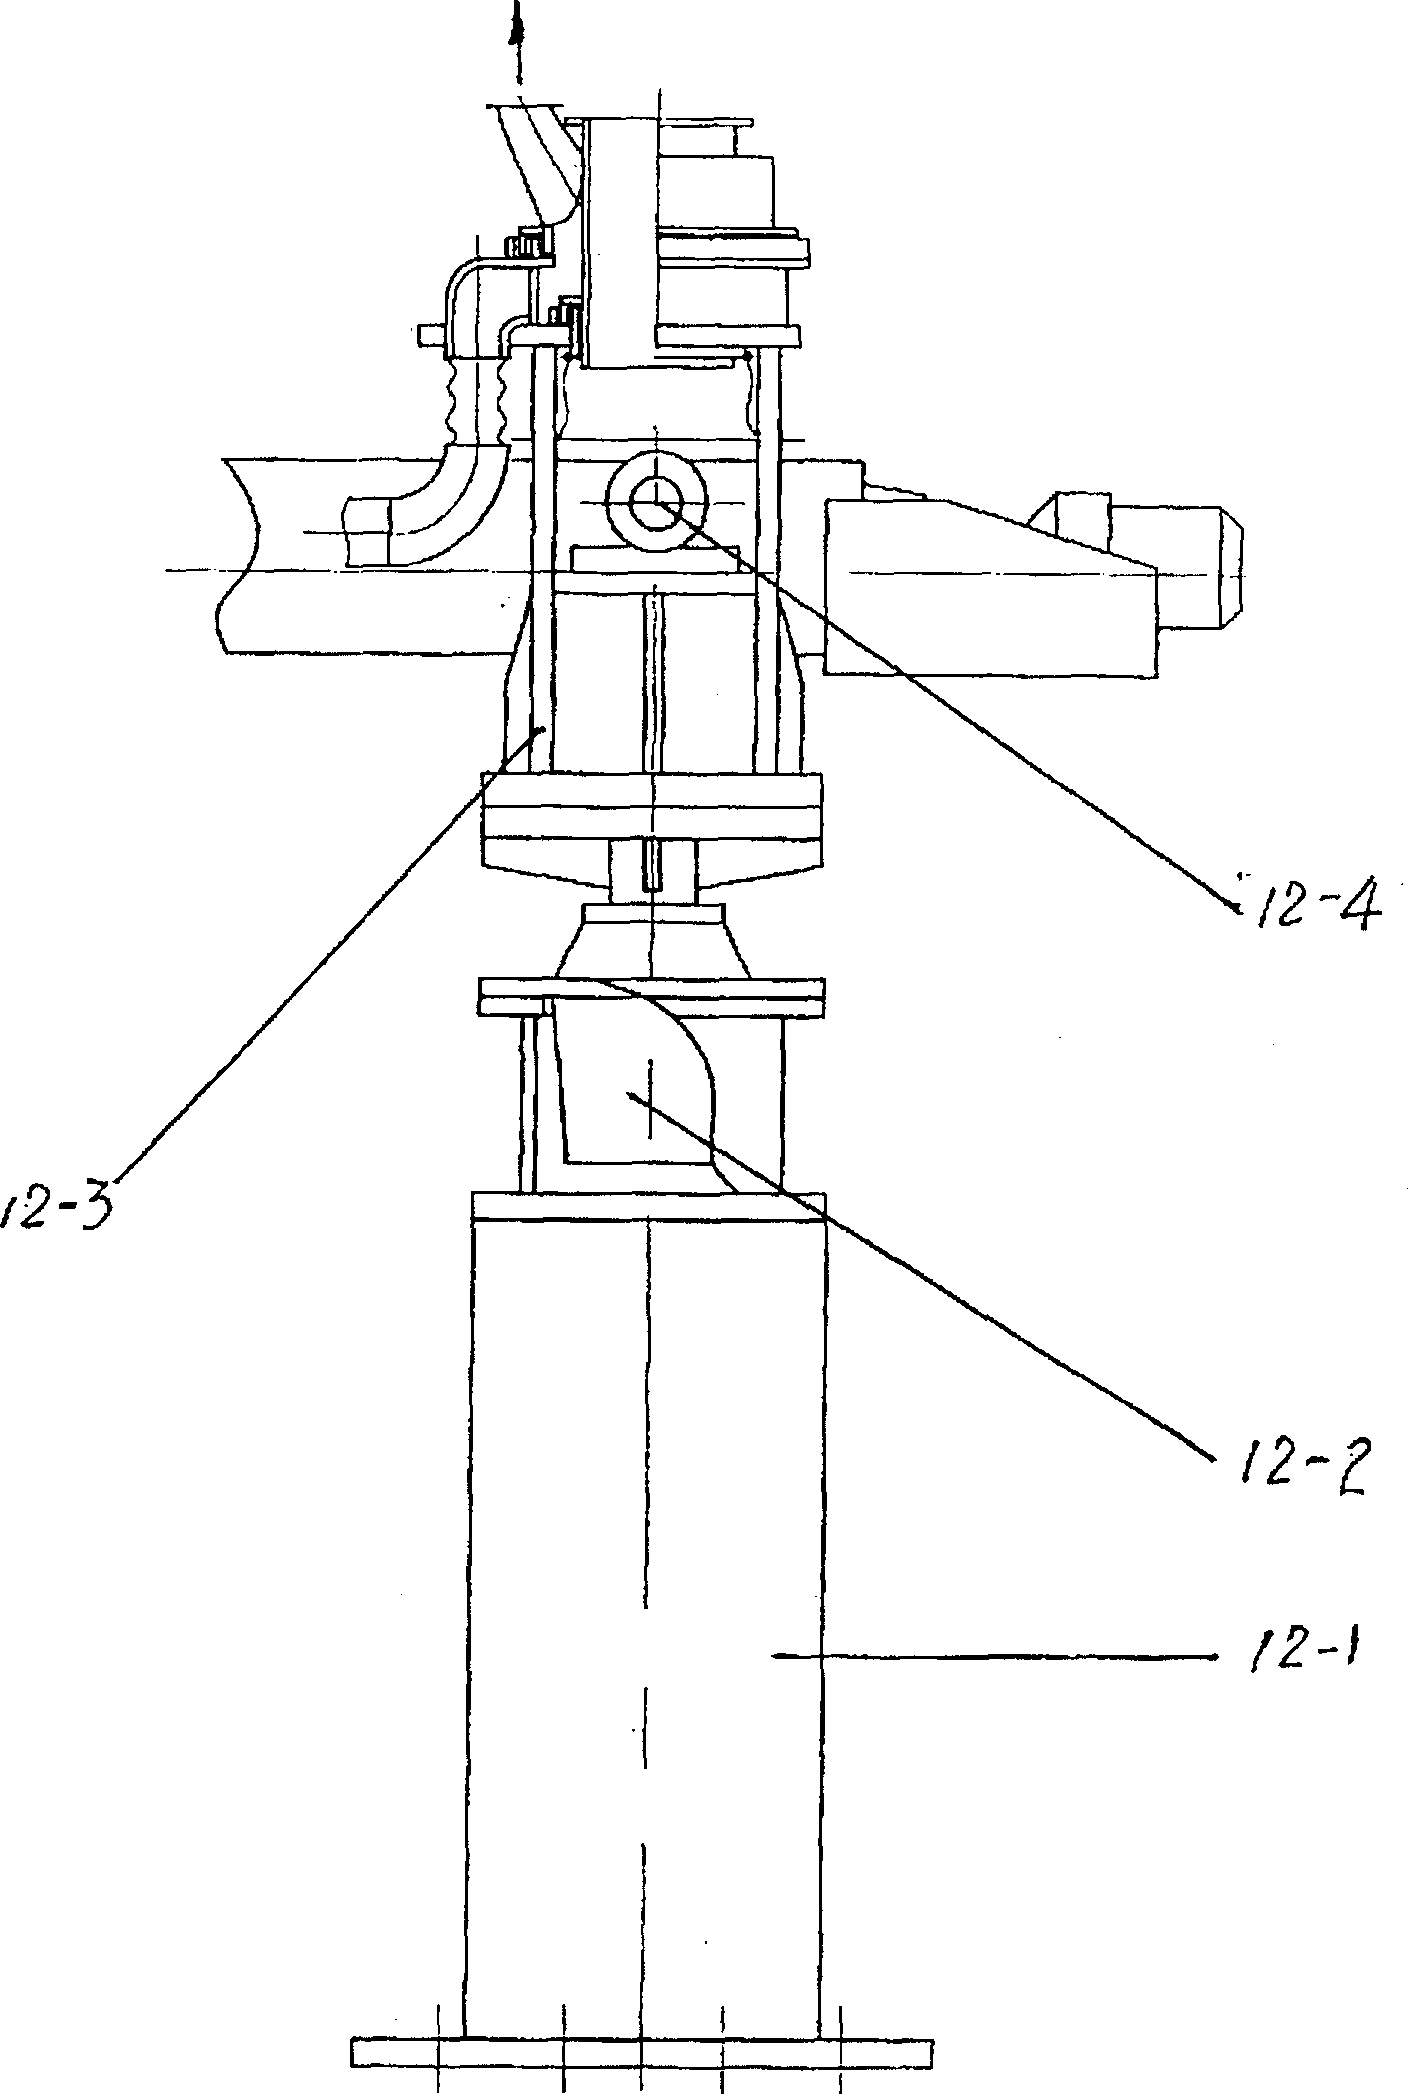 Dust-free carloader for discharging ash from gravitational duster of blast furnace